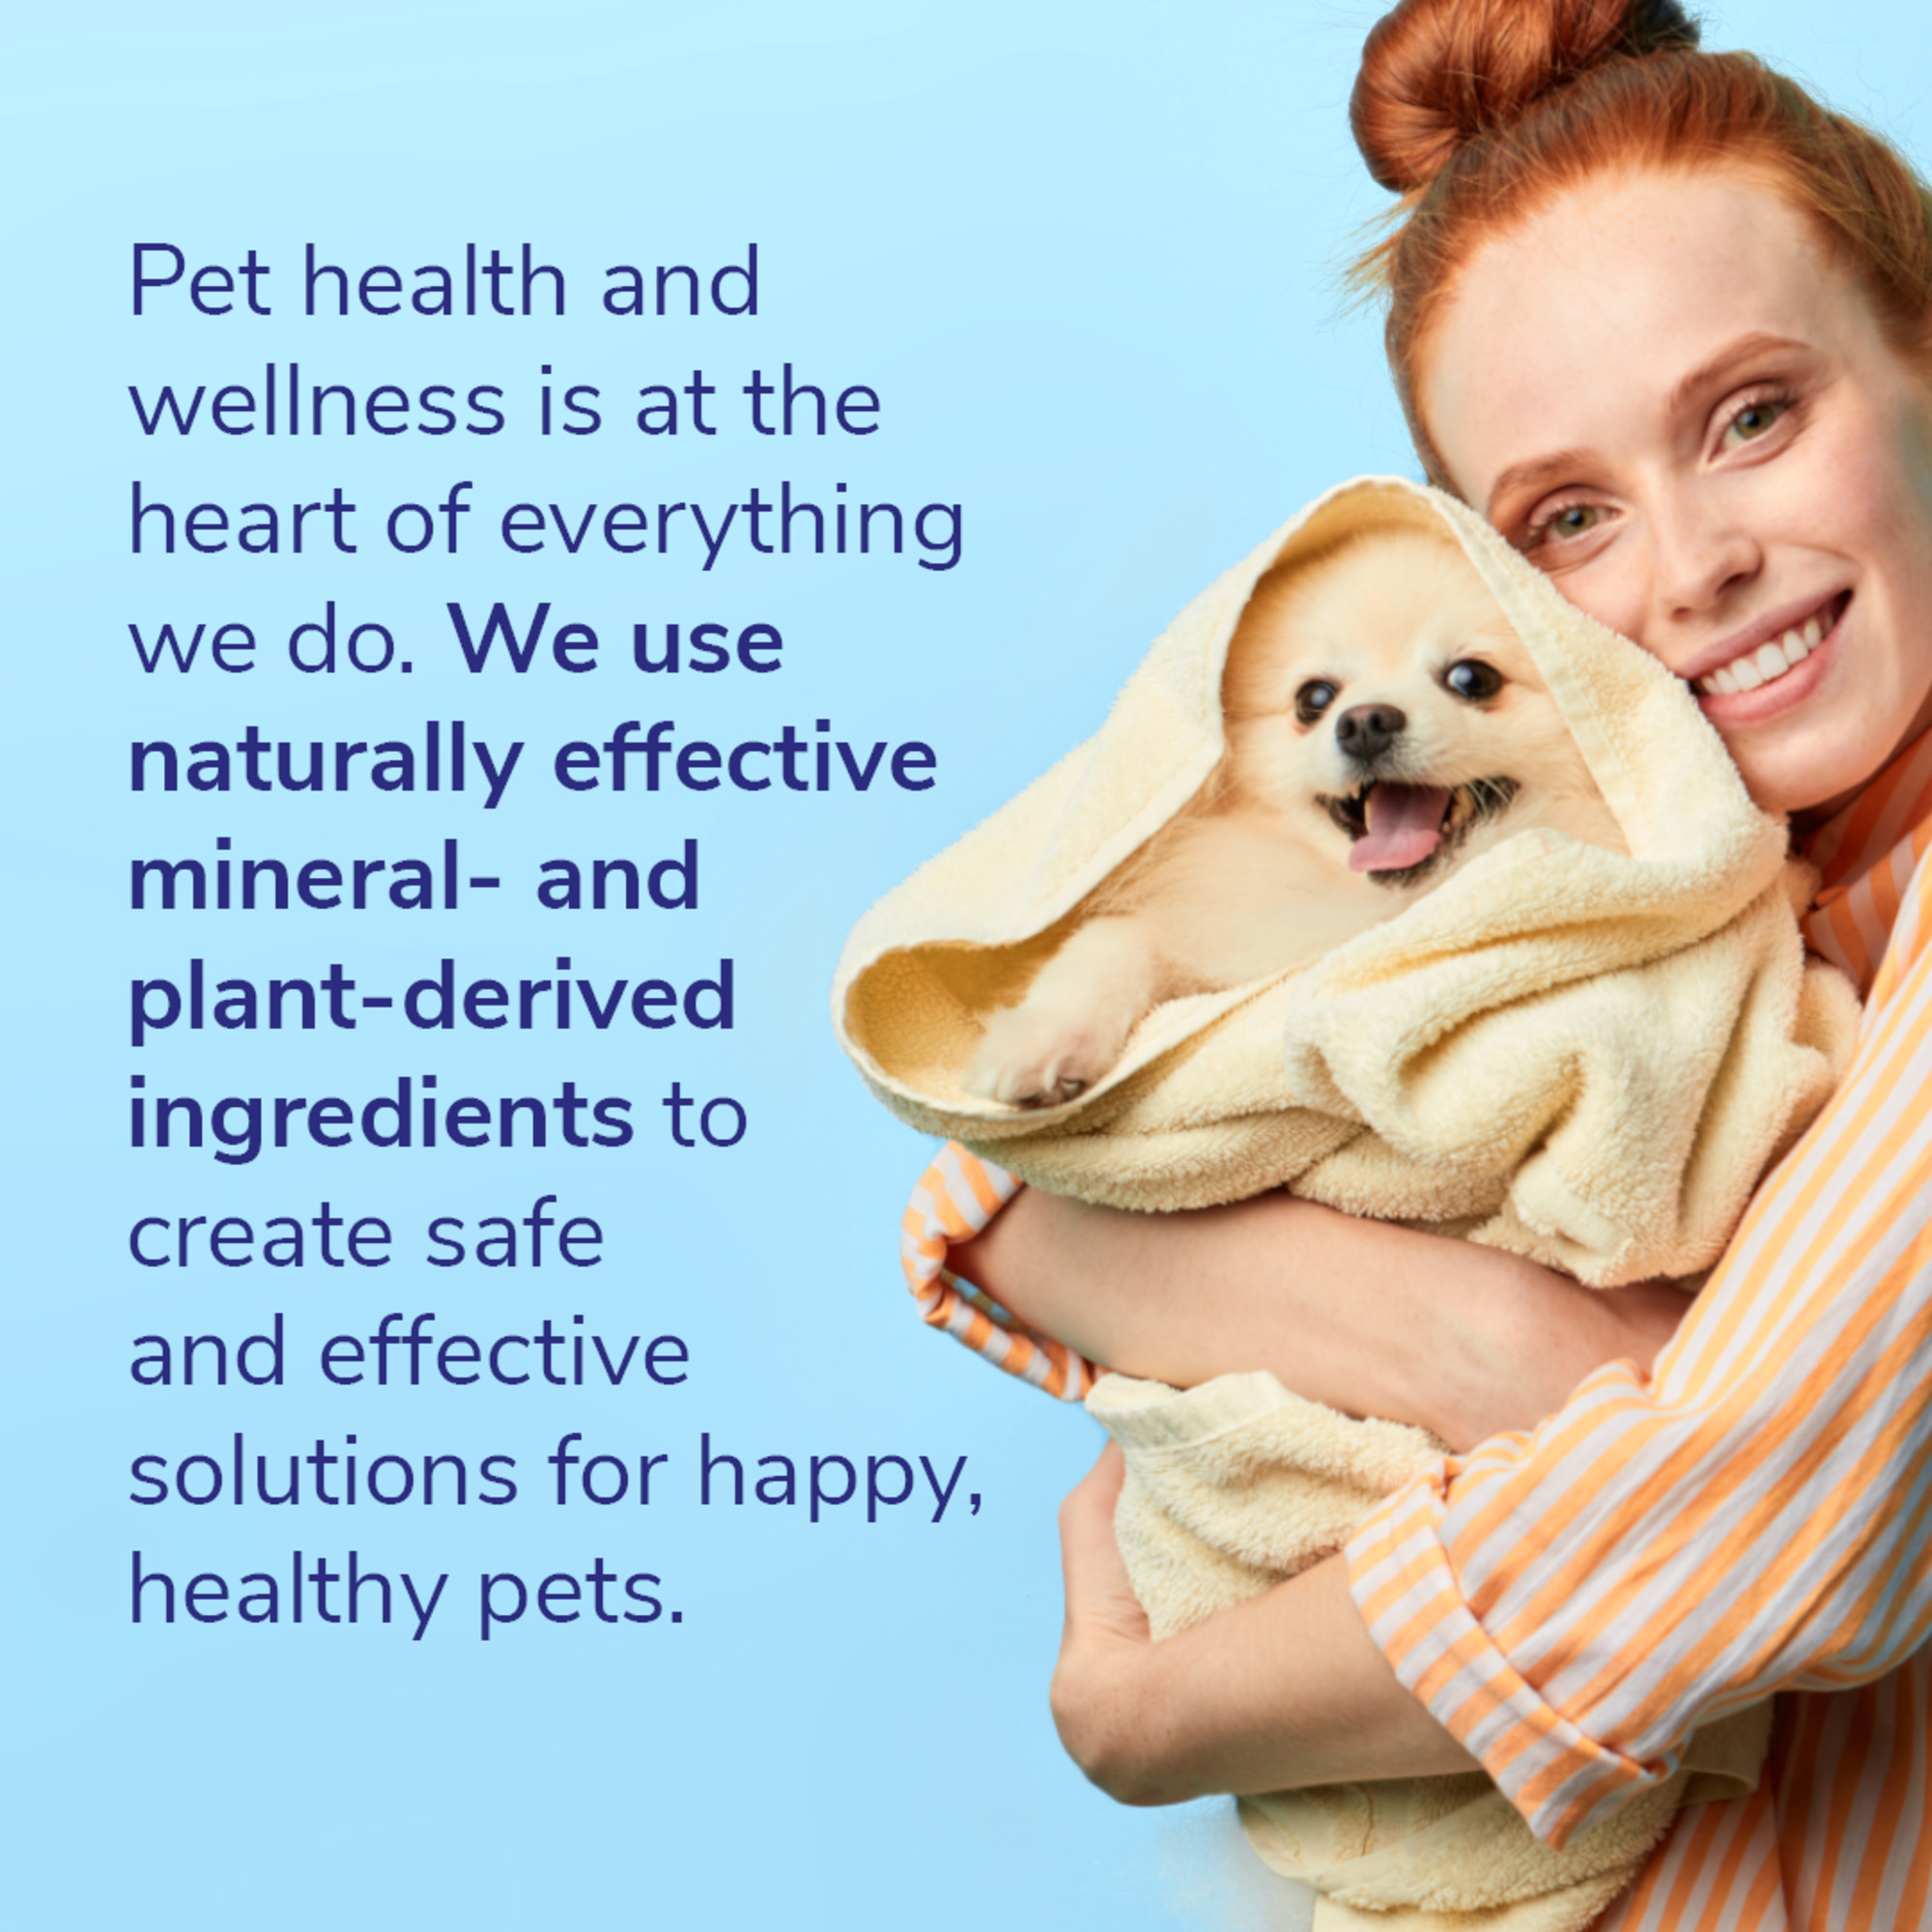 Ultra-Soothing Medicated Treatment for Pets